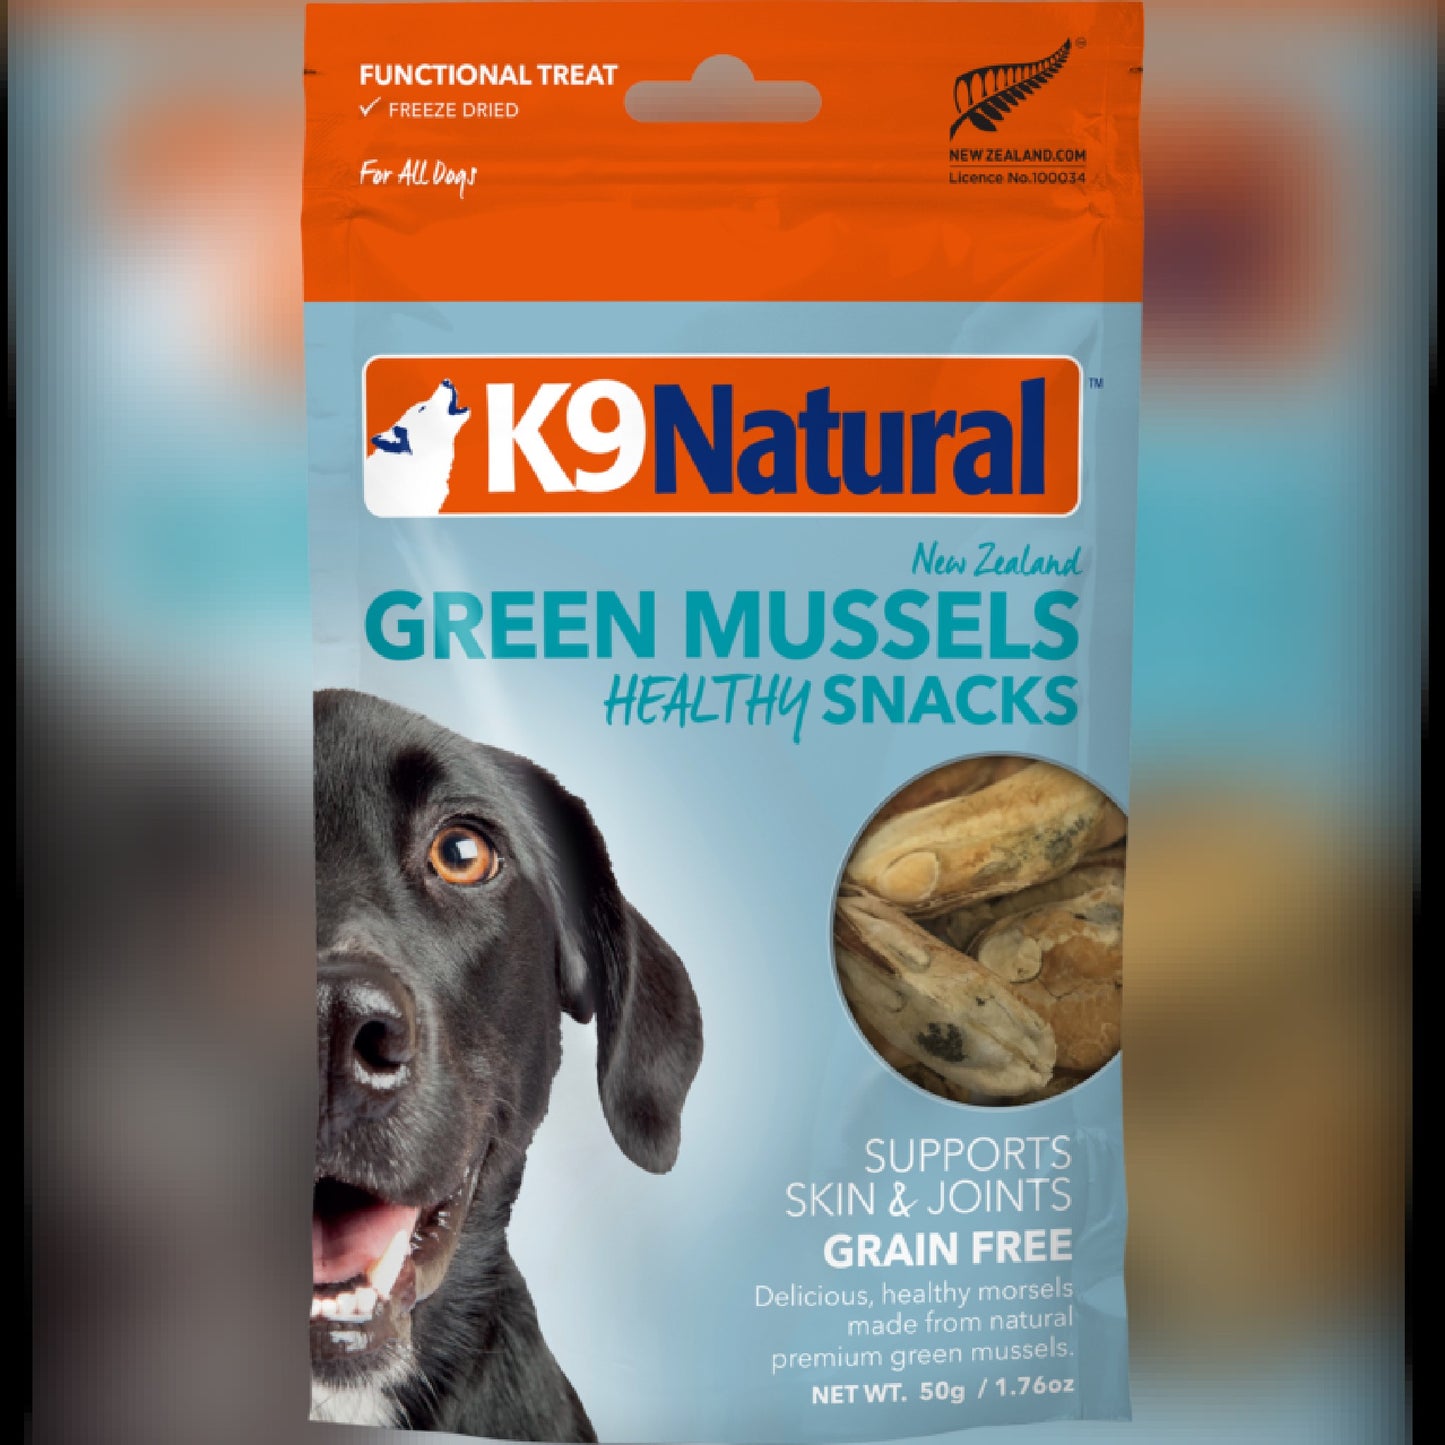 K9 NATURAL TREATS - Green Lipped Mussels - Woofur Natural Pet Products